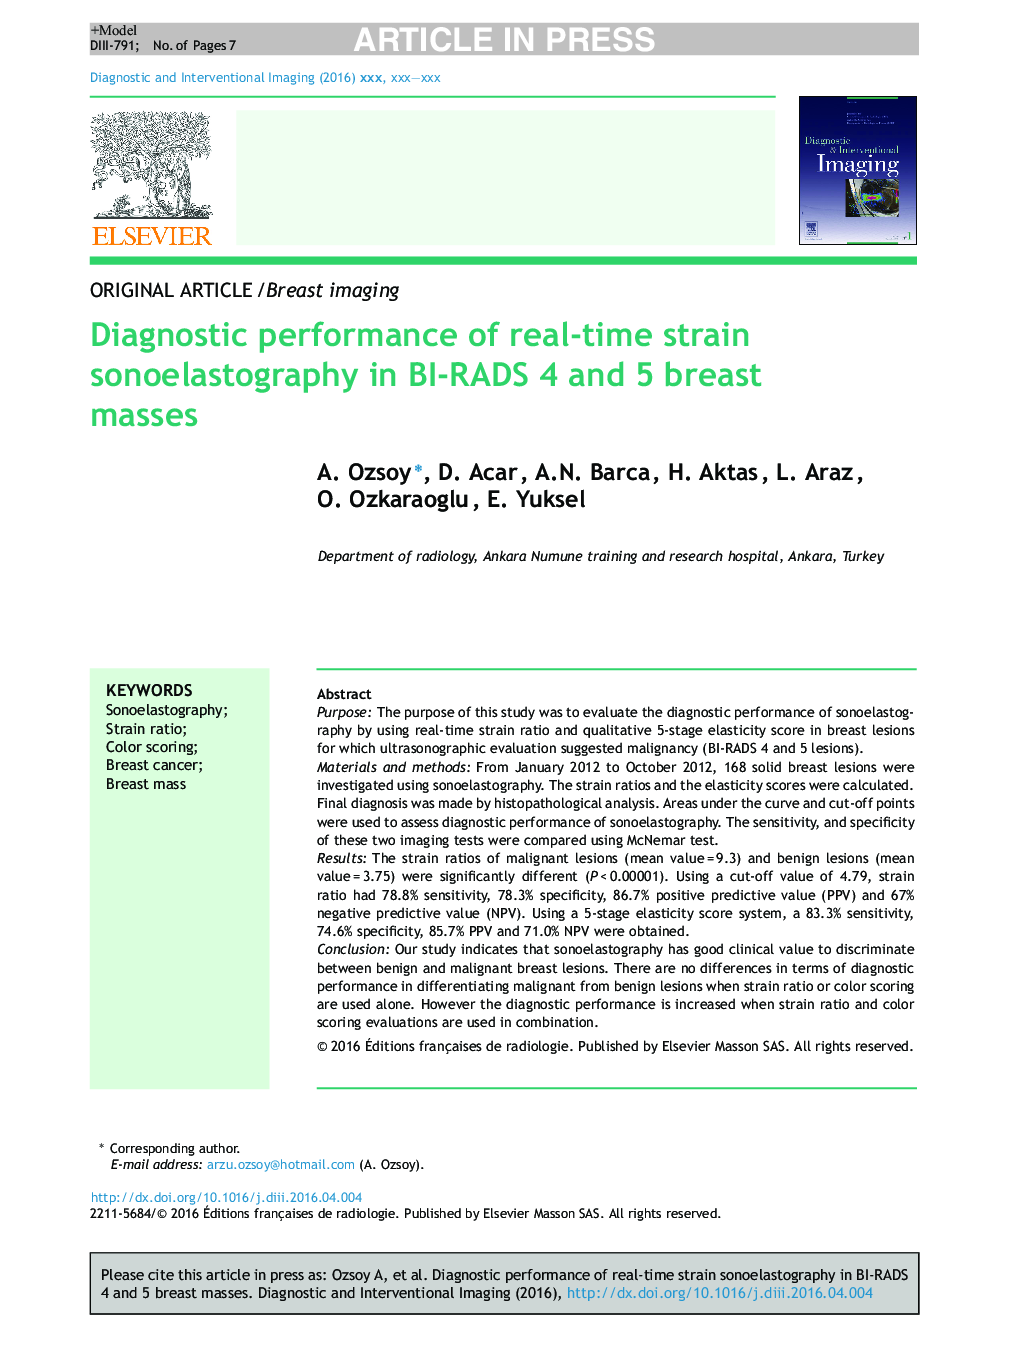 Diagnostic performance of real-time strain sonoelastography in BI-RADS 4 and 5 breast masses